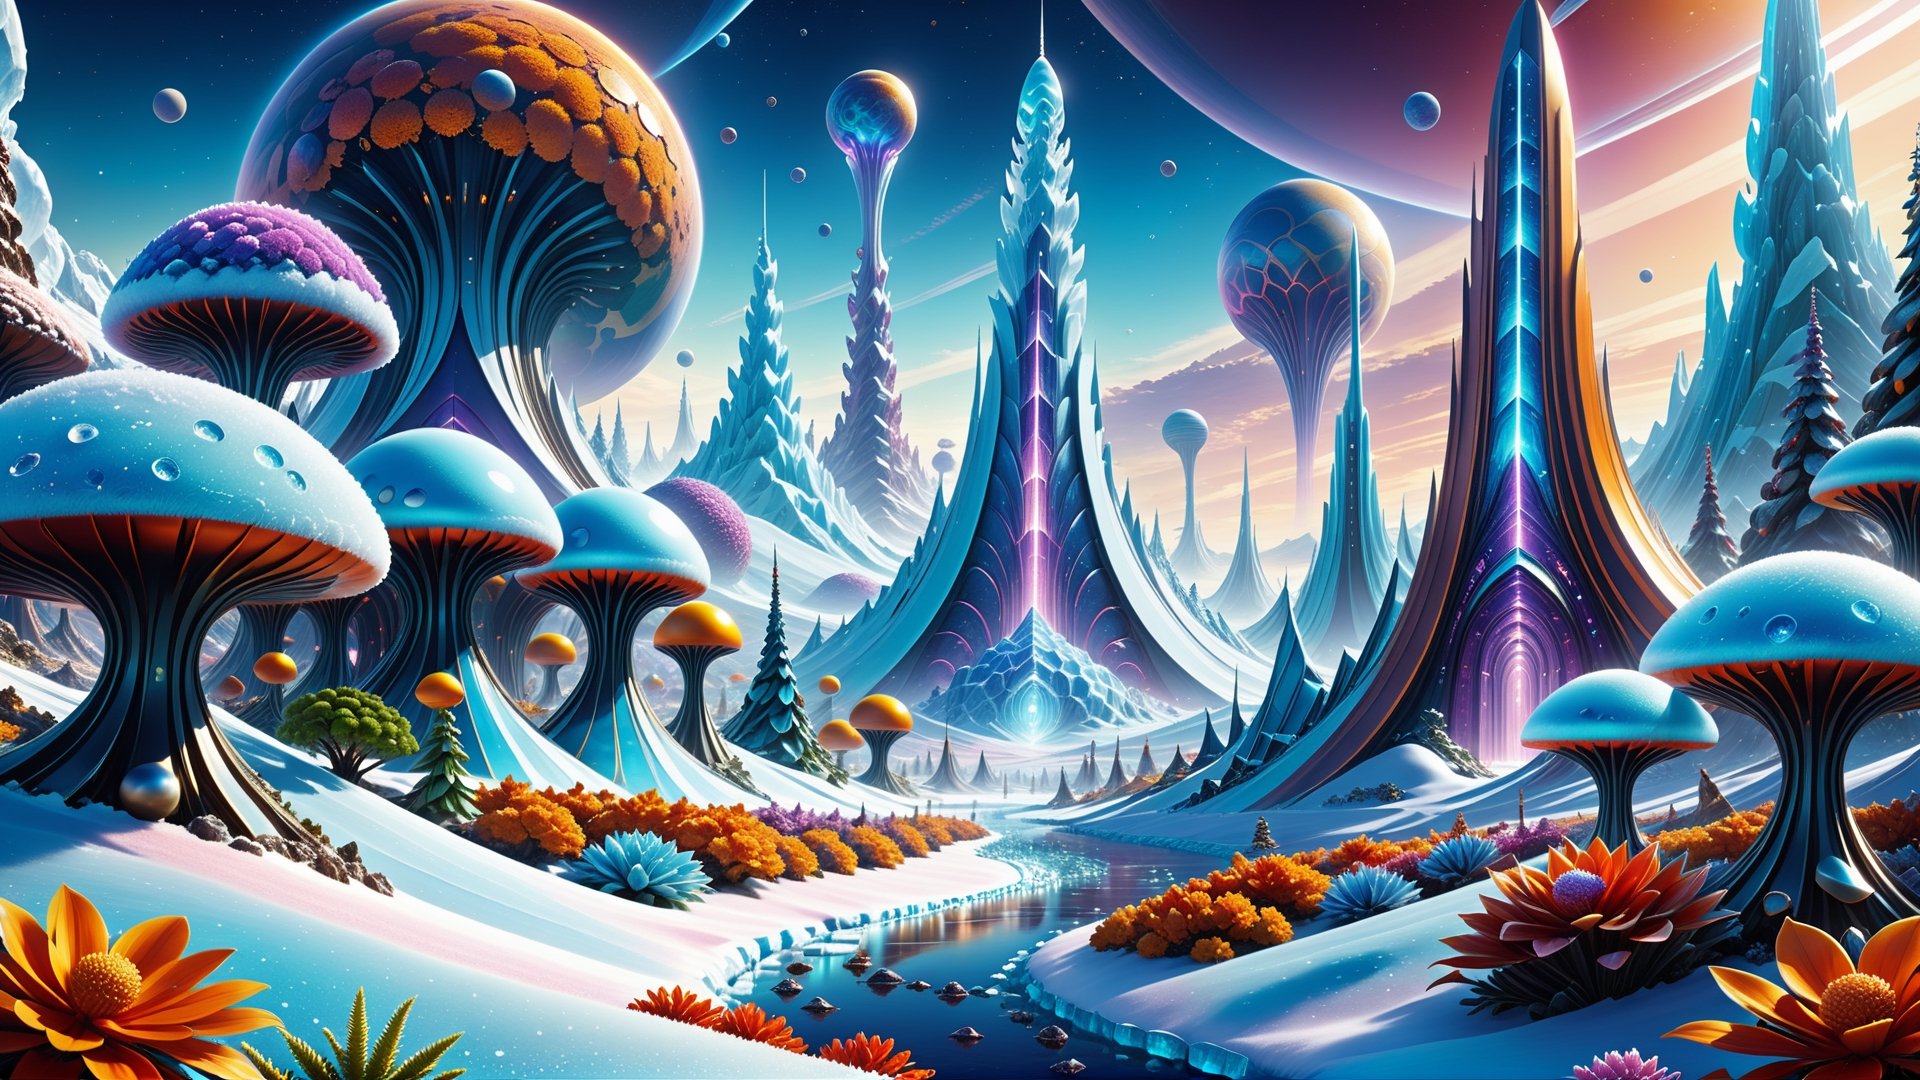 advanced technology of a Type IV civilization, according to the Kardashov scale, terrestrial landscape of the planet X frost, ice, exotic_alien_flora and exotic_alien_fauna, abstract shapes and colors, intricate contrast,

,DonMM4ch1n3W0rldXL ,DonMC3l3st14l3xpl0r3rsXL,3d_toon_xl:0.8, JuggerCineXL2:0.9, detail_master_XL:0.9, detailmaster2.0:0.9,DonMCyb3rN3cr0XL ,Reality XL:1.4, ,EpicLand,iso island